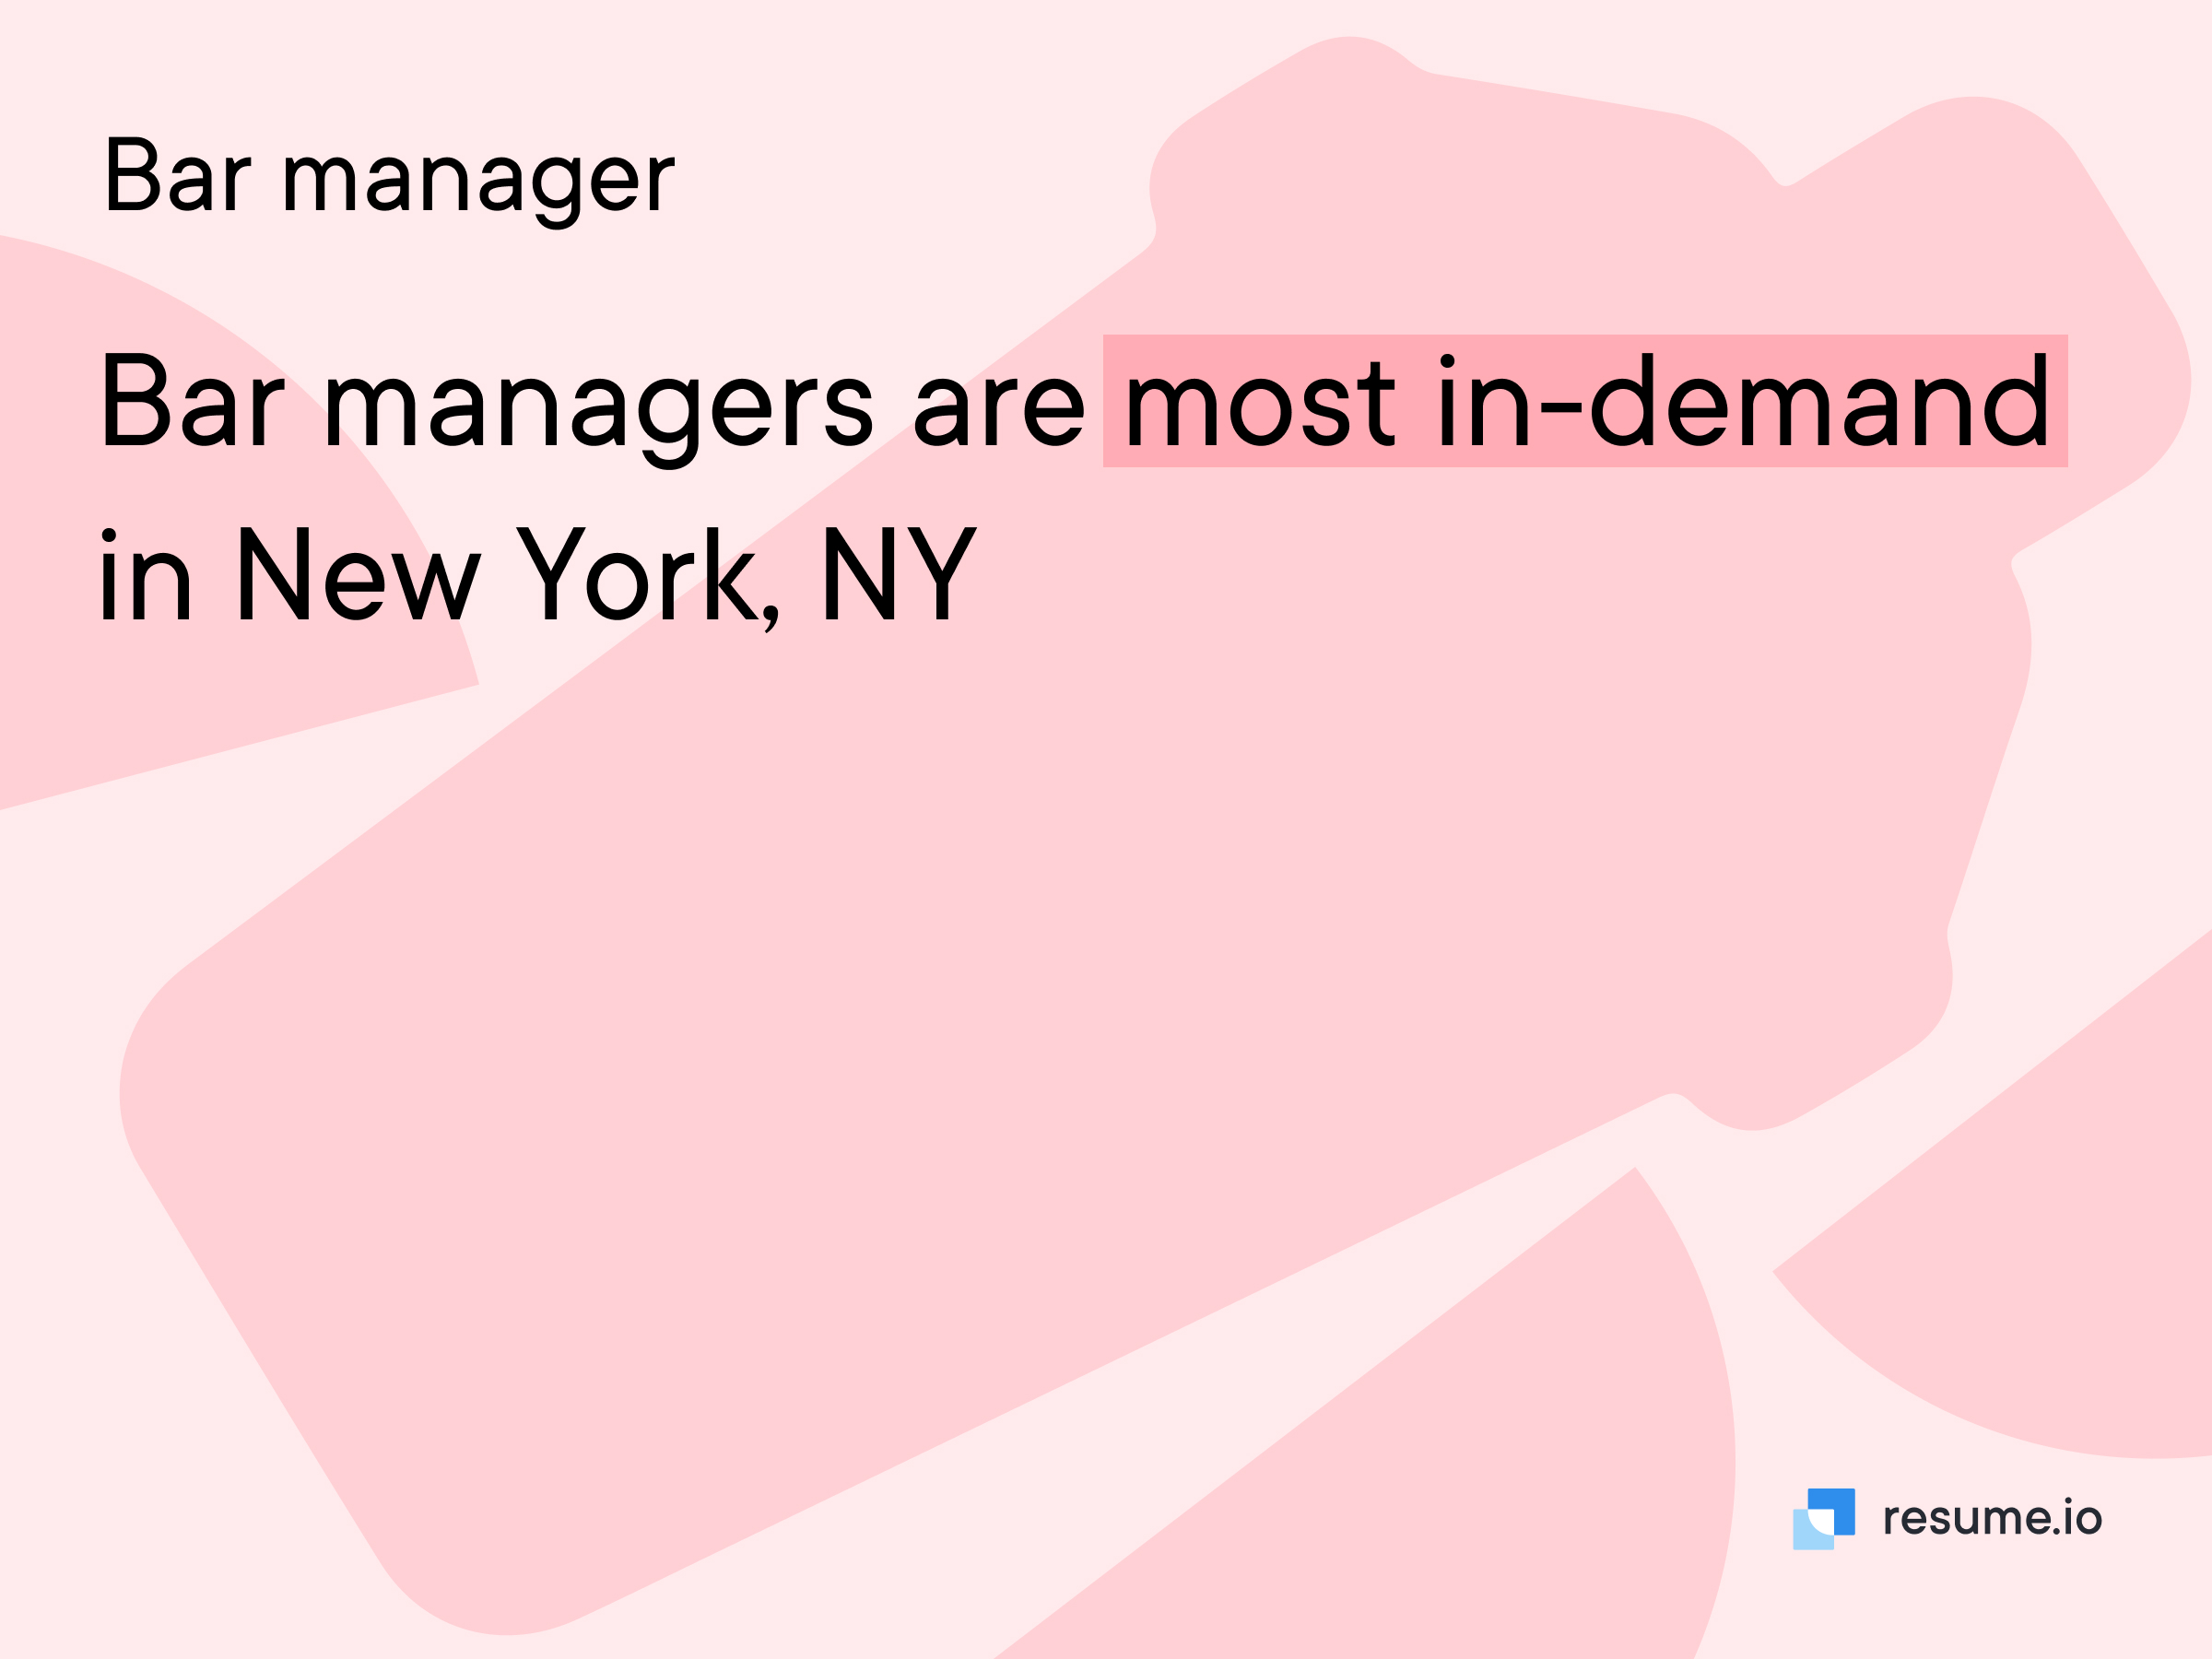 Bar managers are most in-demand in New York